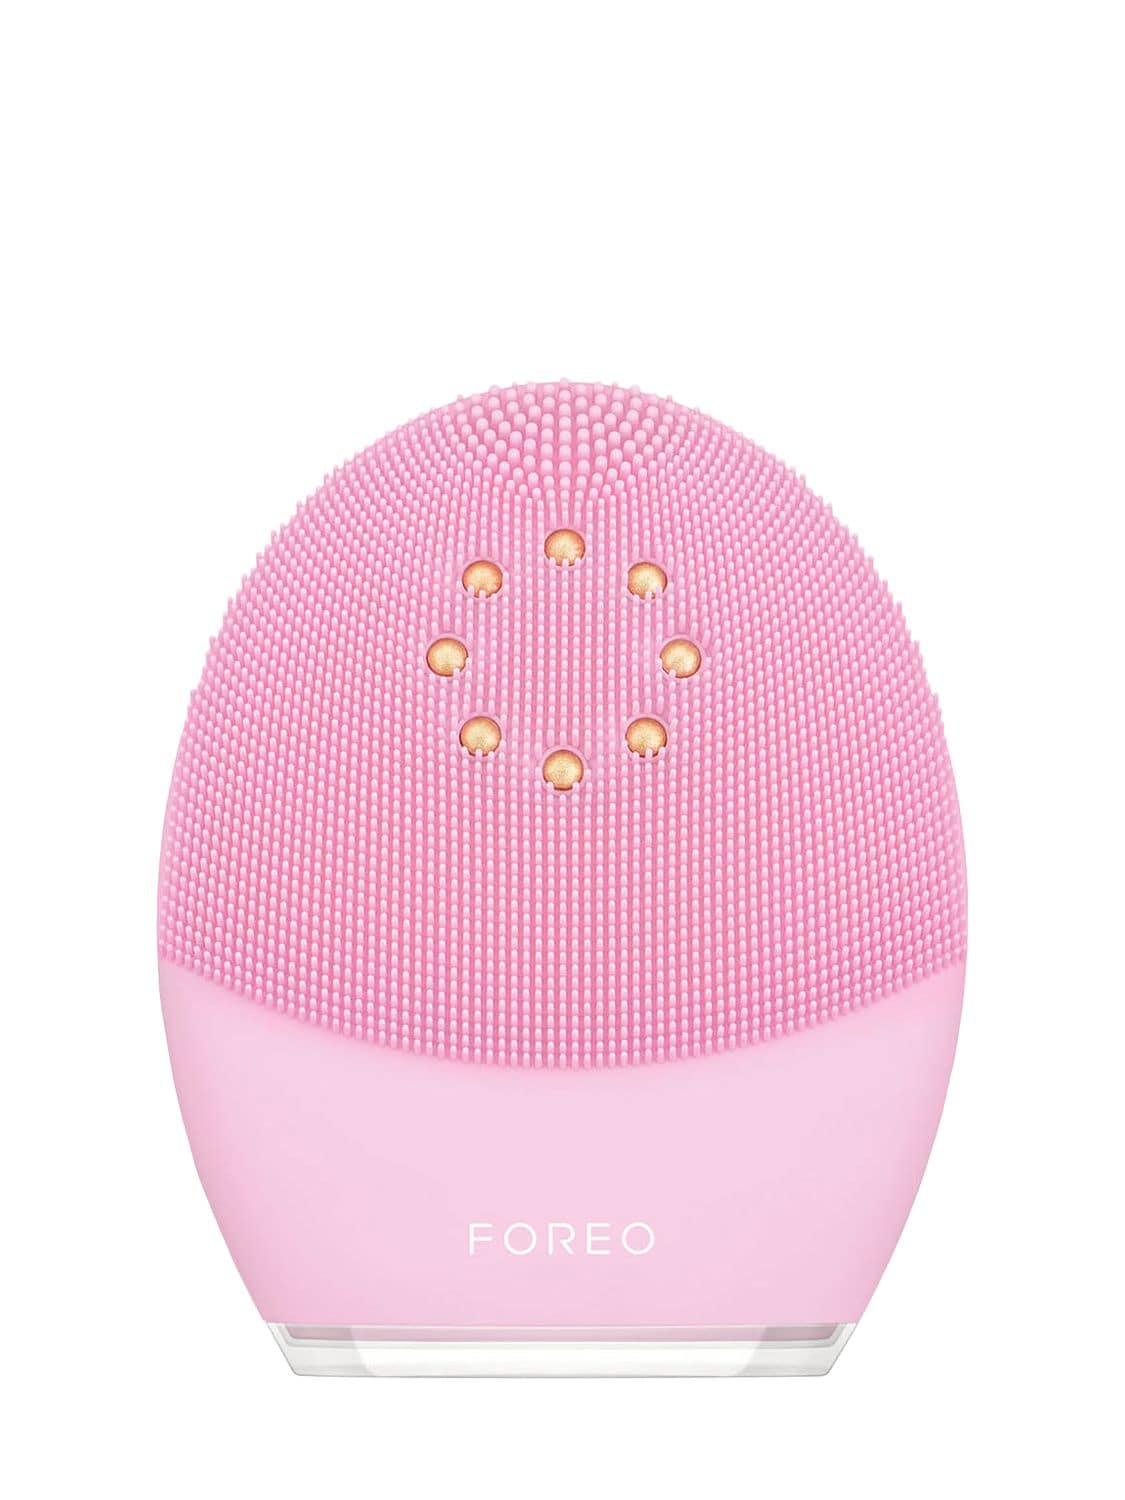 Image of Luna 3 Plus Face Cleansing Device